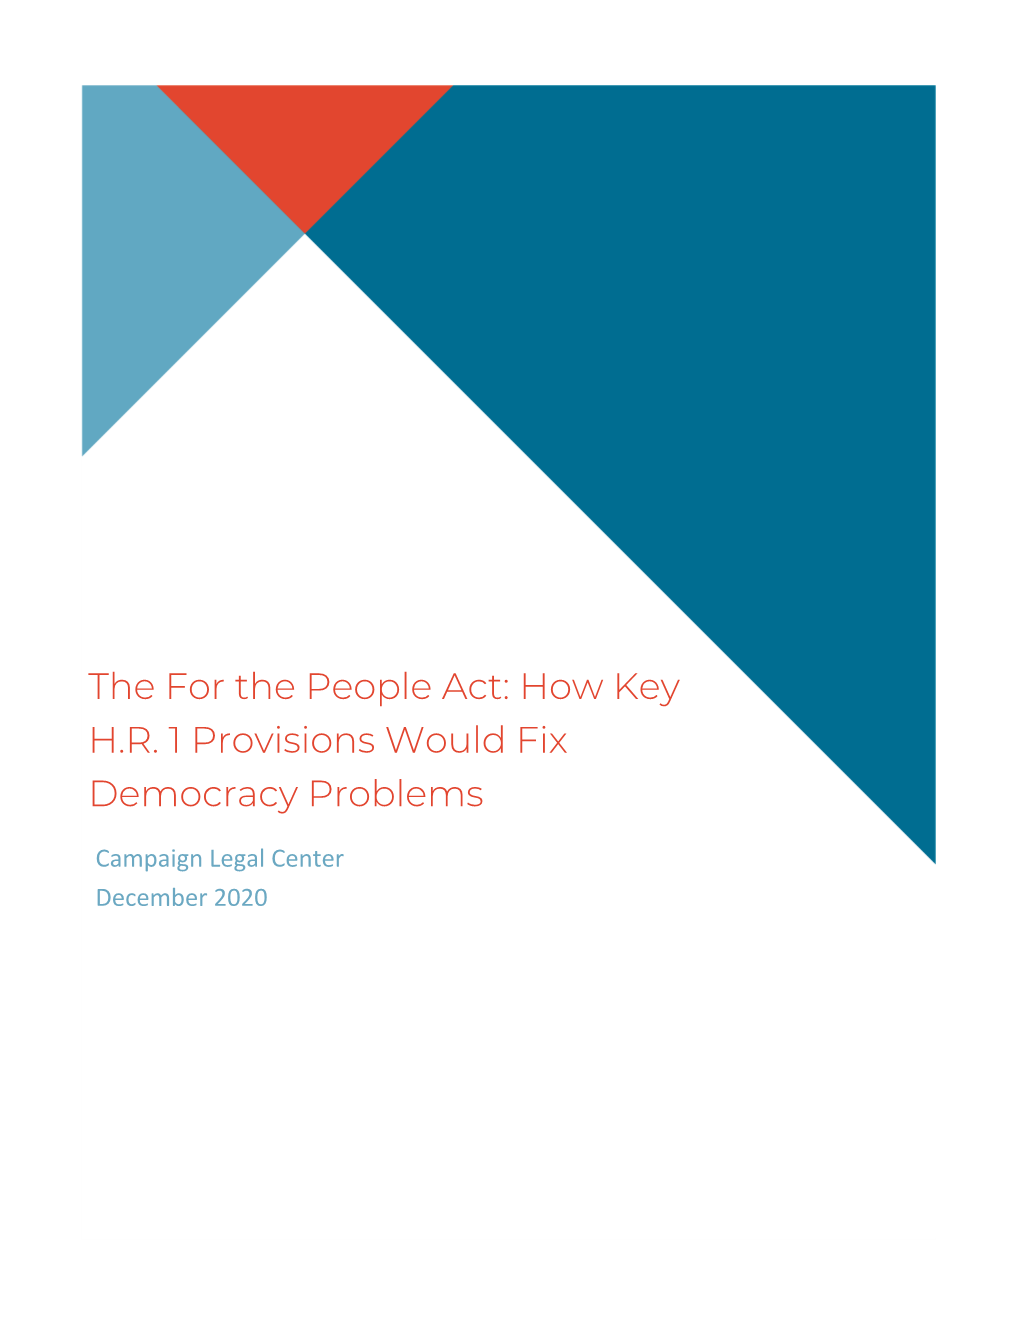 The for the People Act: How Key H.R. 1 Provisions Would Fix Democracy Problems